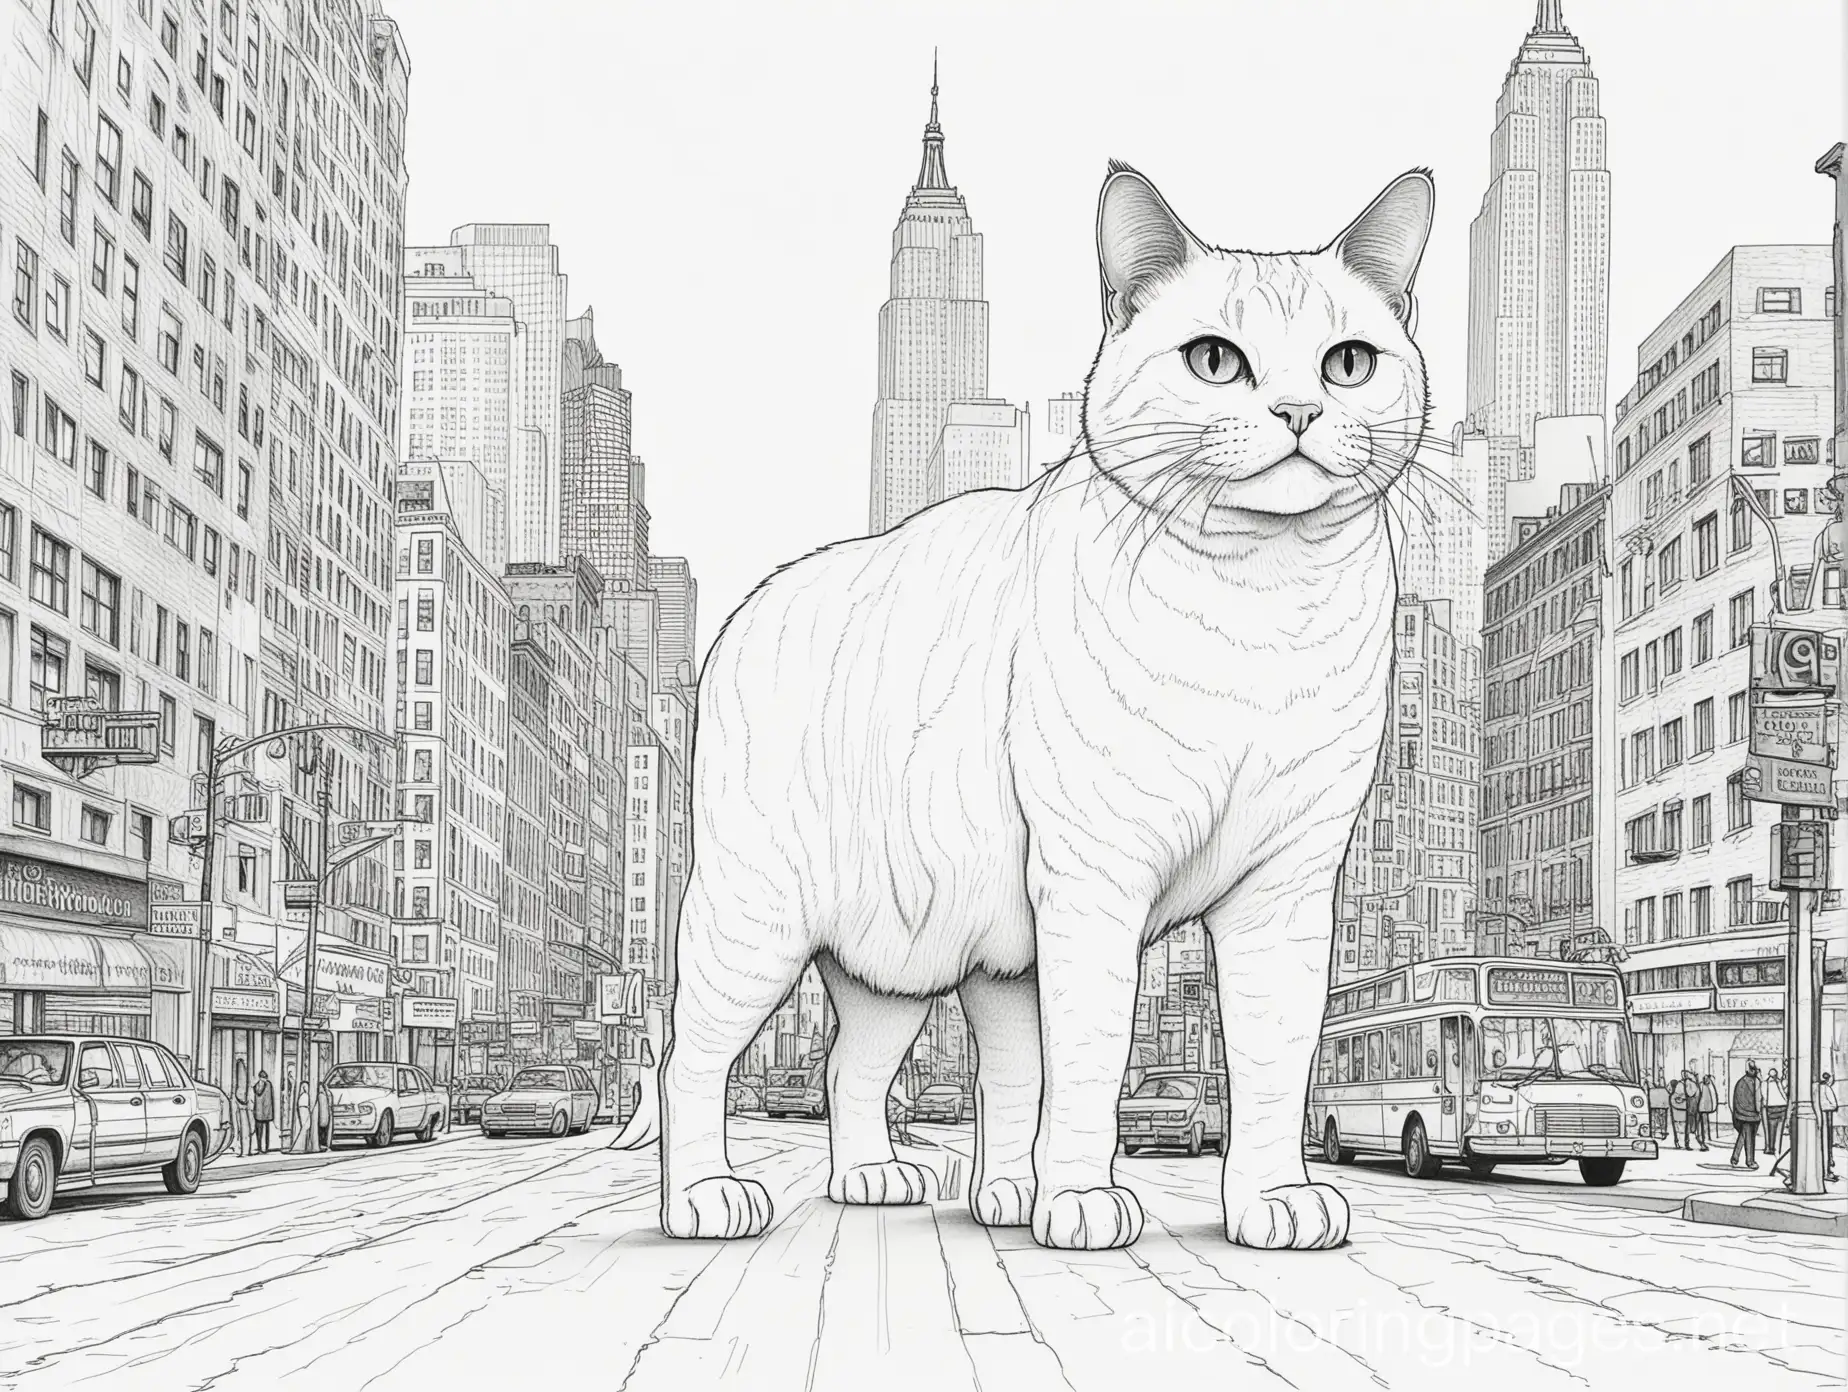 Hola, ¿me puedes generar una imagen de un gato gigante paseando en la ciudad de nueva york?, Coloring Page, black and white, line art, white background, Simplicity, Ample White Space. The background of the coloring page is plain white to make it easy for young children to color within the lines. The outlines of all the subjects are easy to distinguish, making it simple for kids to color without too much difficulty